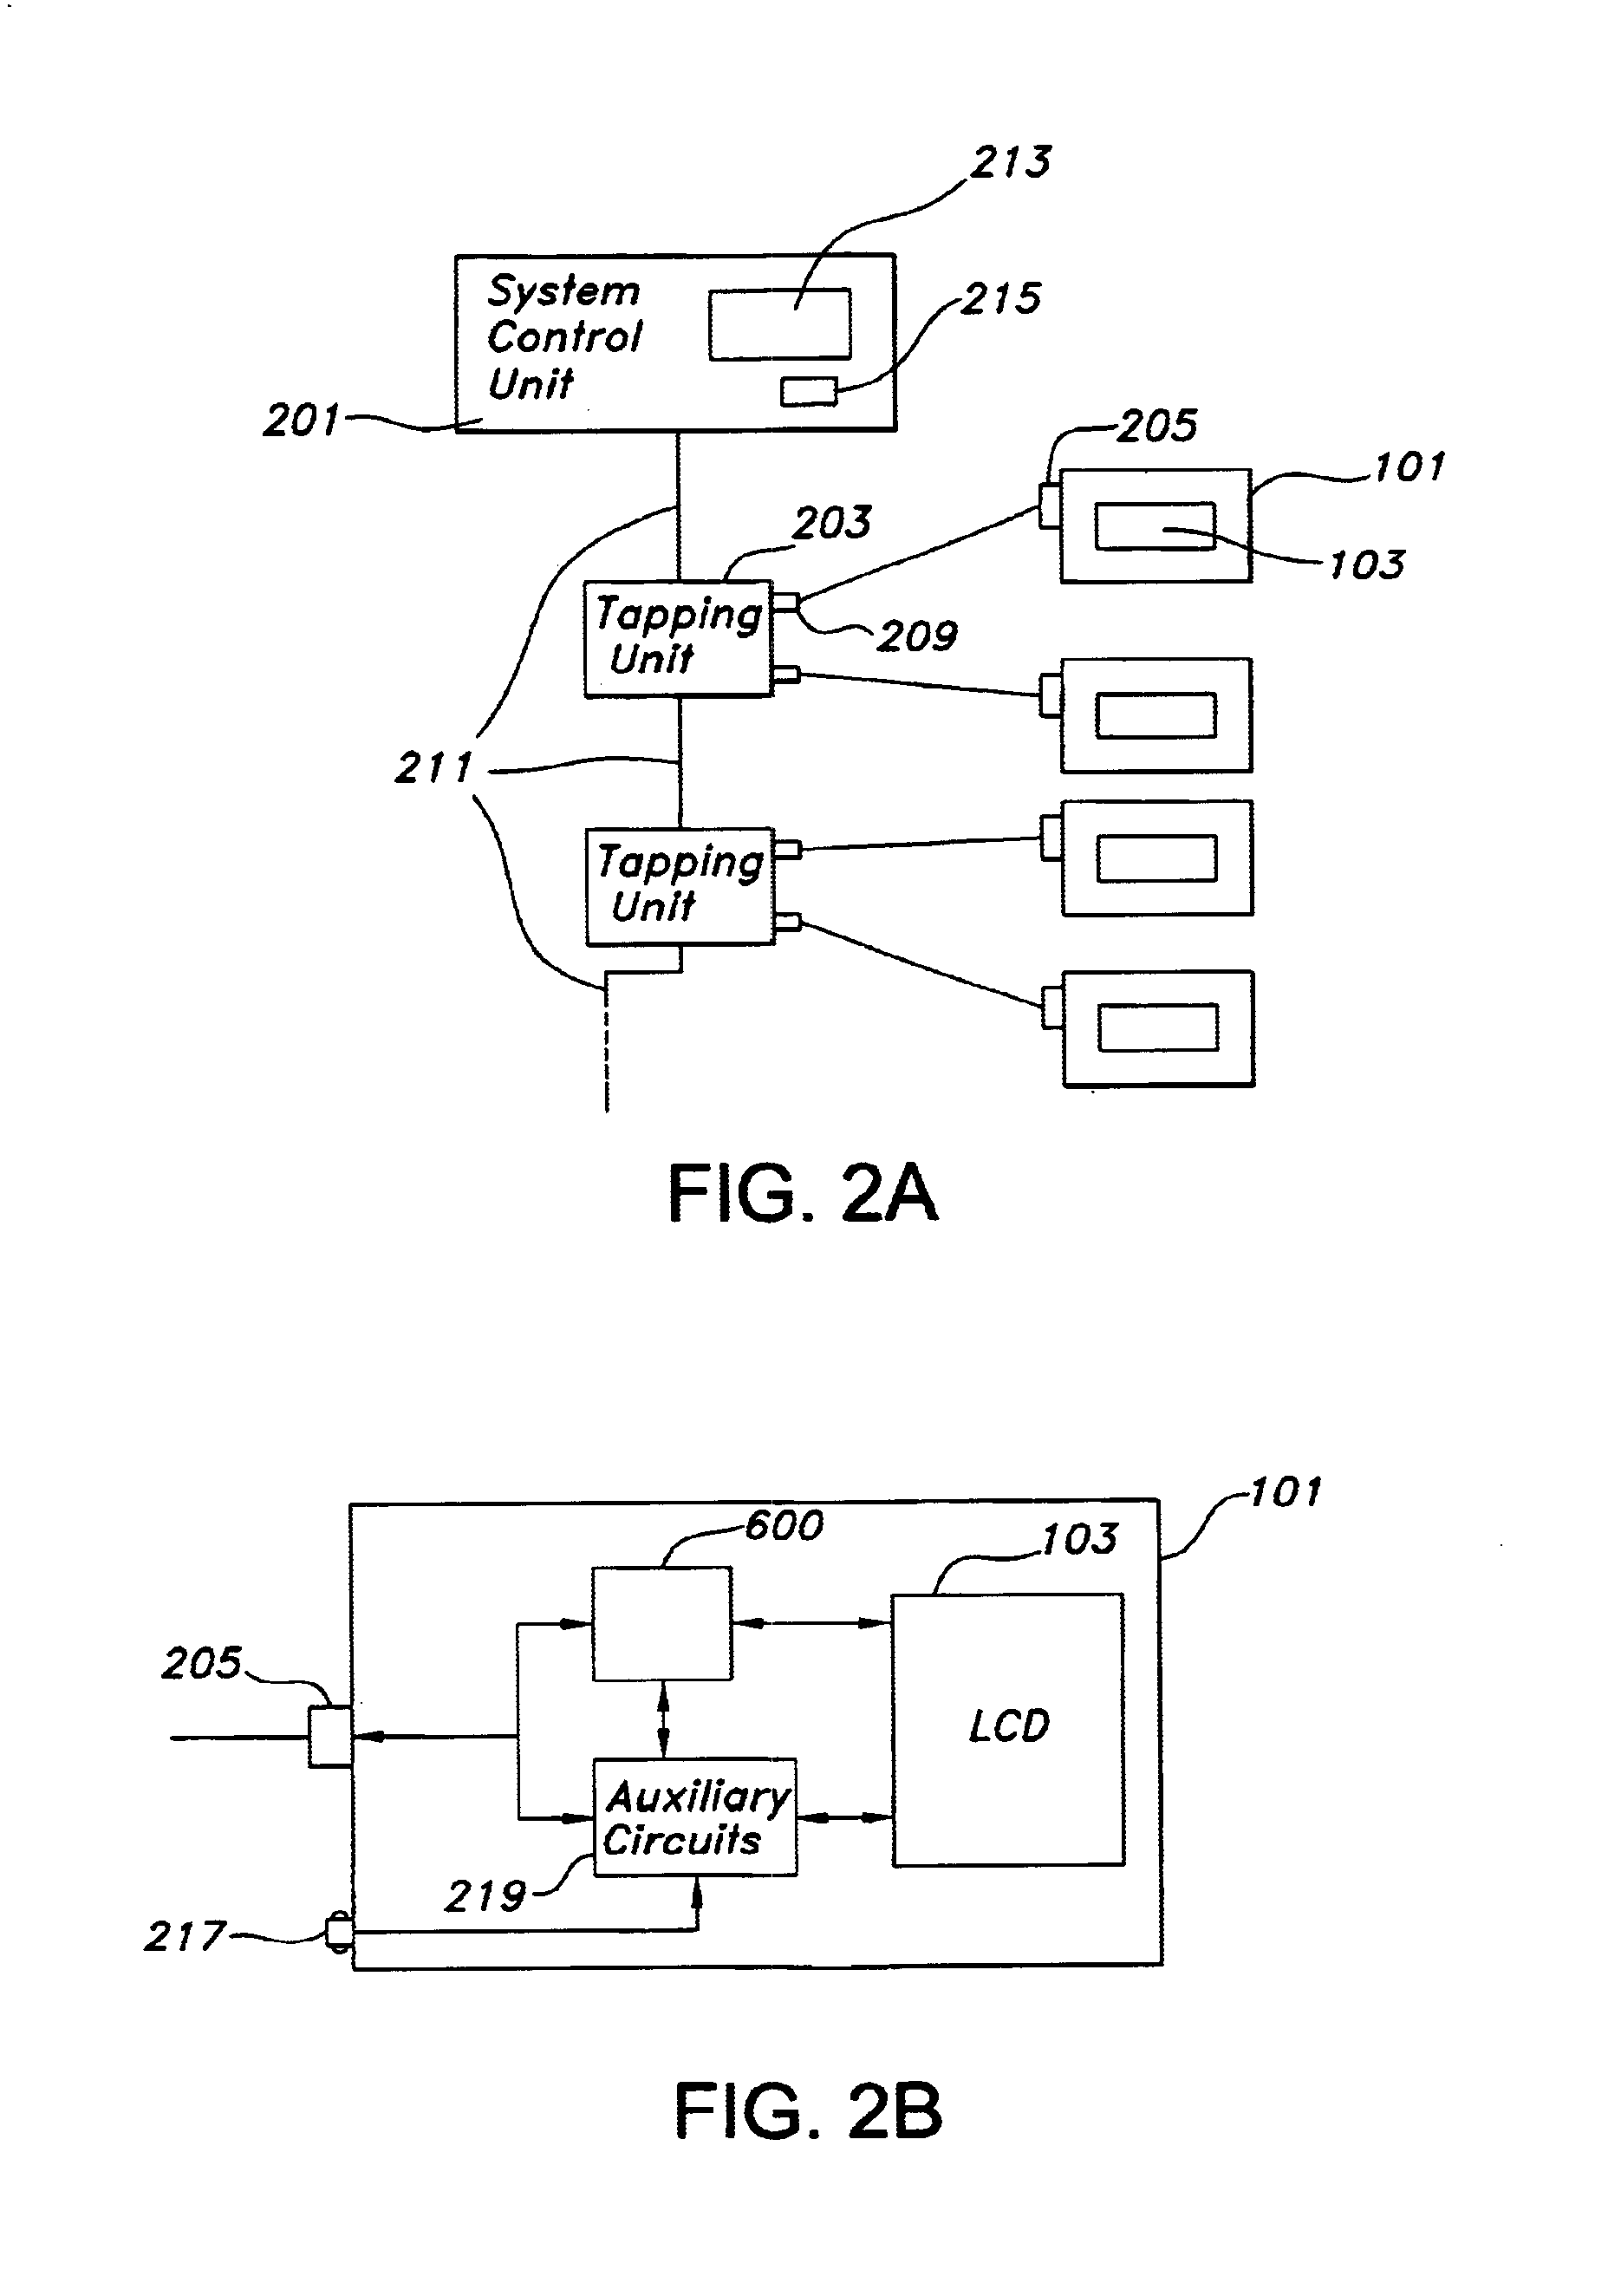 System and method for test data reporting using a status signal